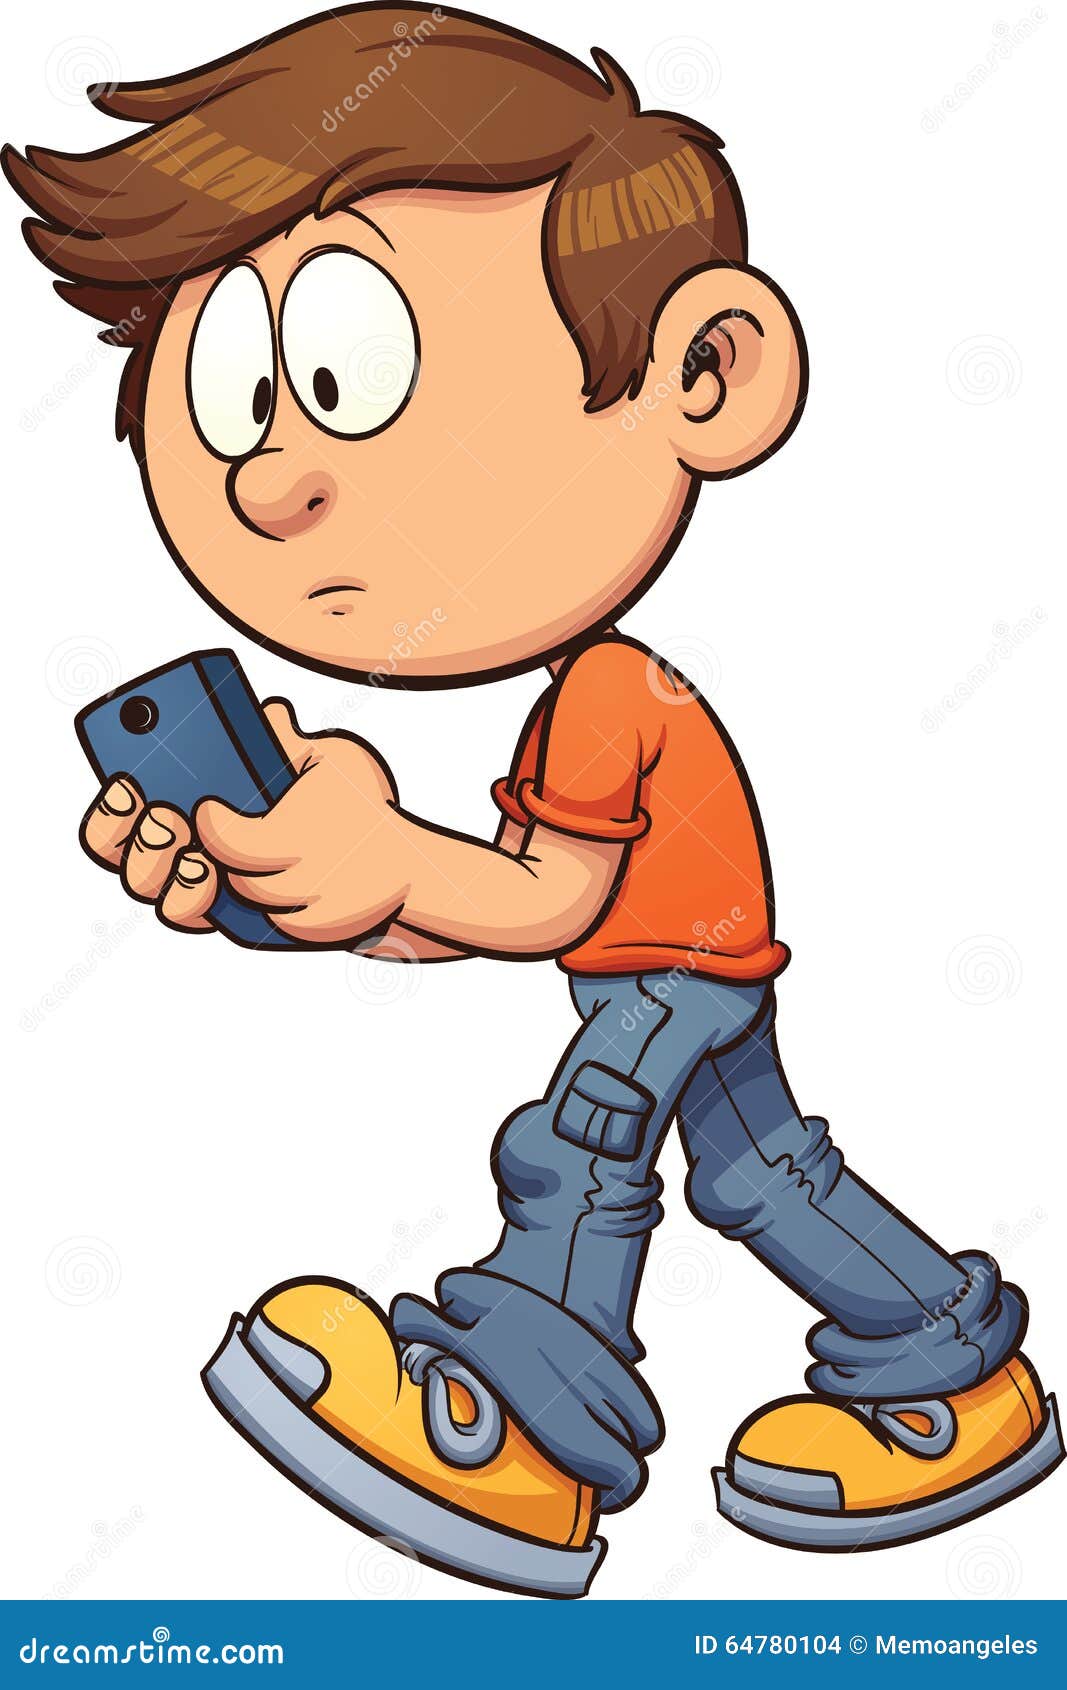 girl texting clipart - photo #19